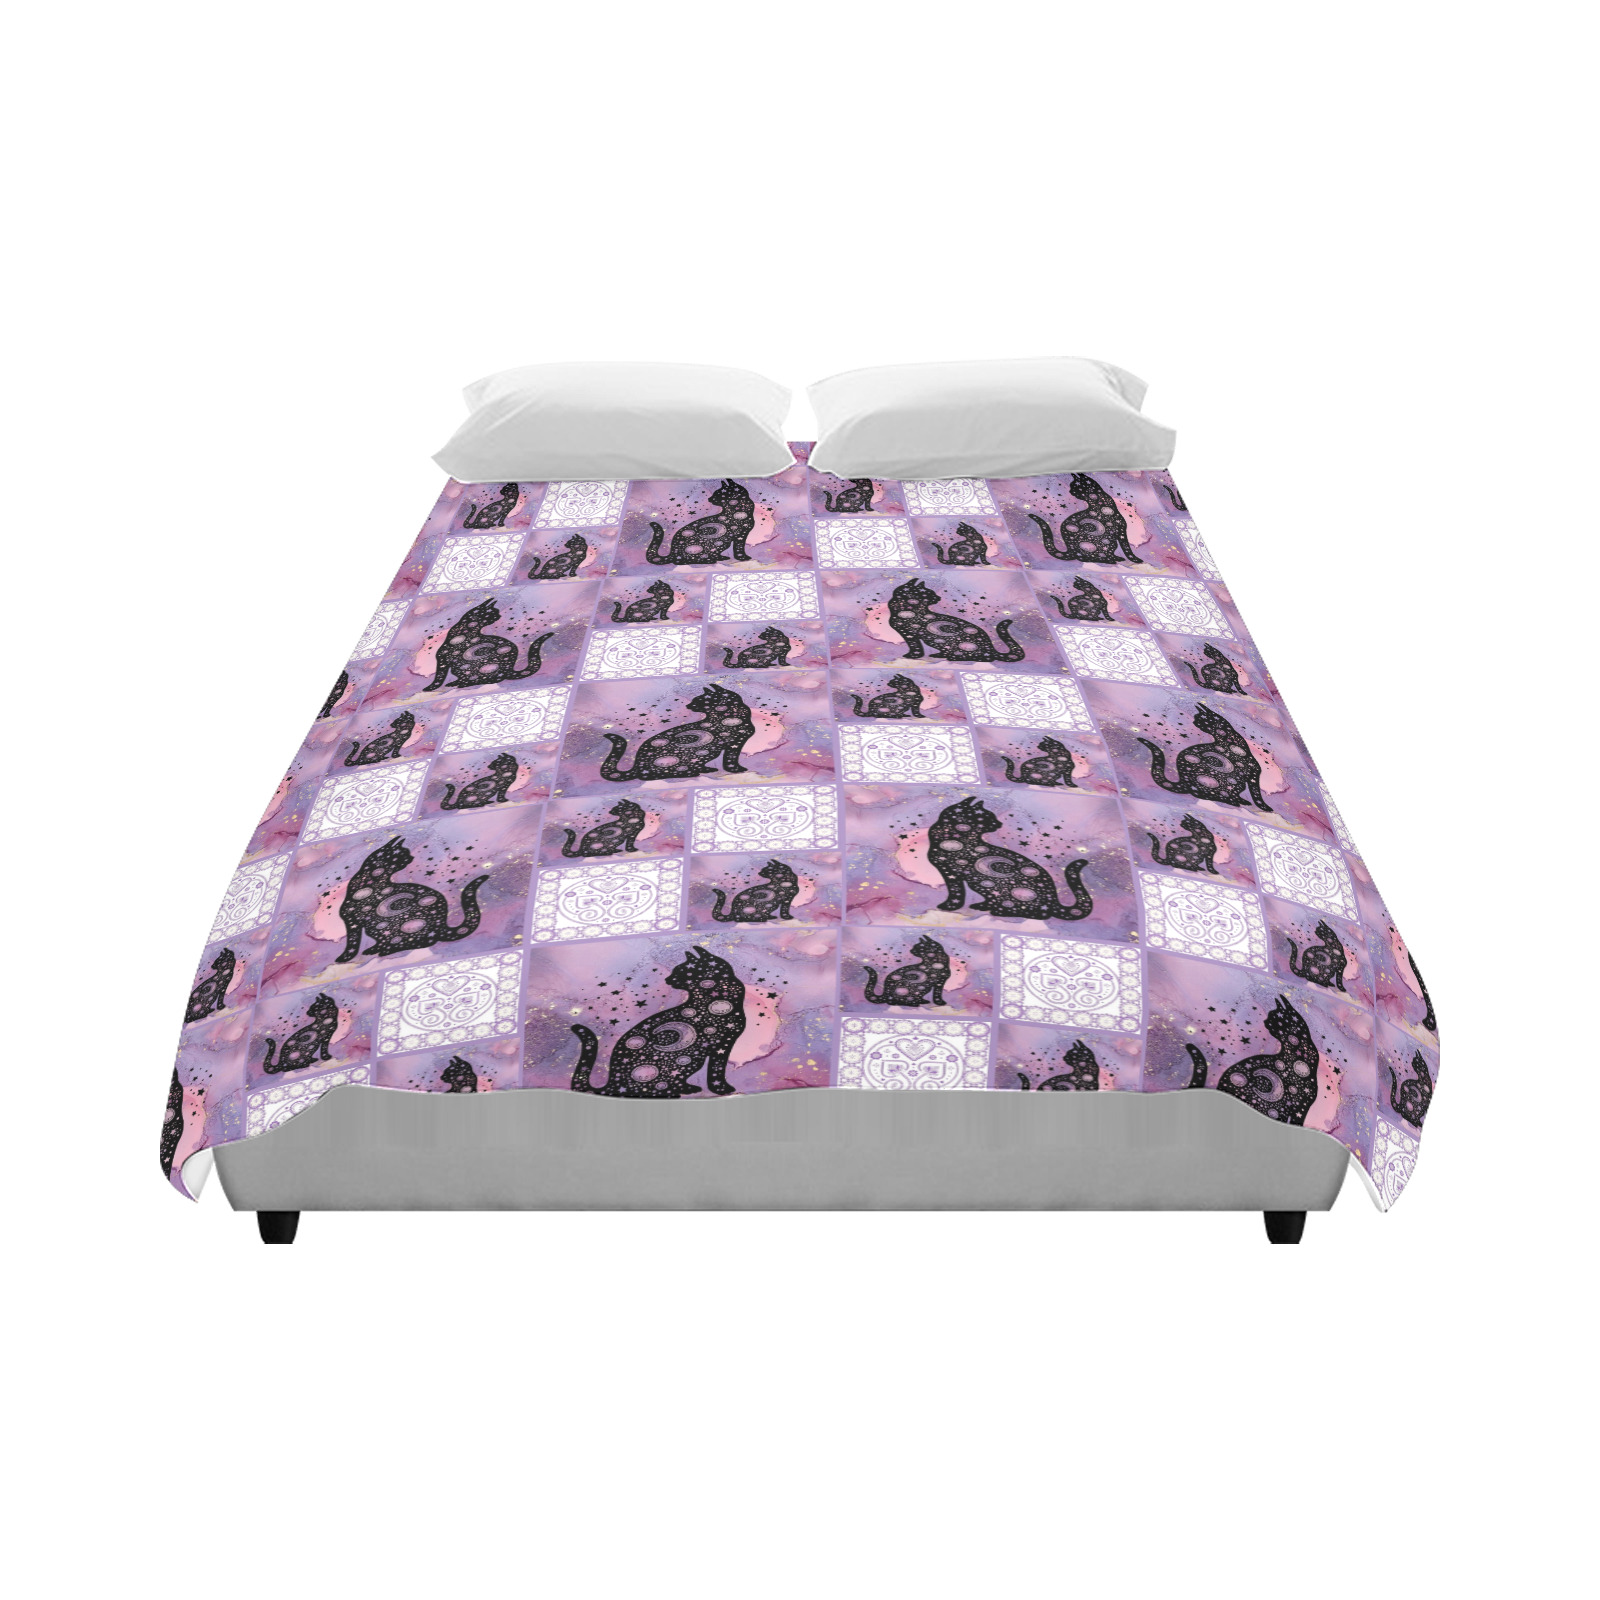 Purple Cosmic Cats Patchwork Pattern Duvet Cover 86"x70" ( All-over-print)